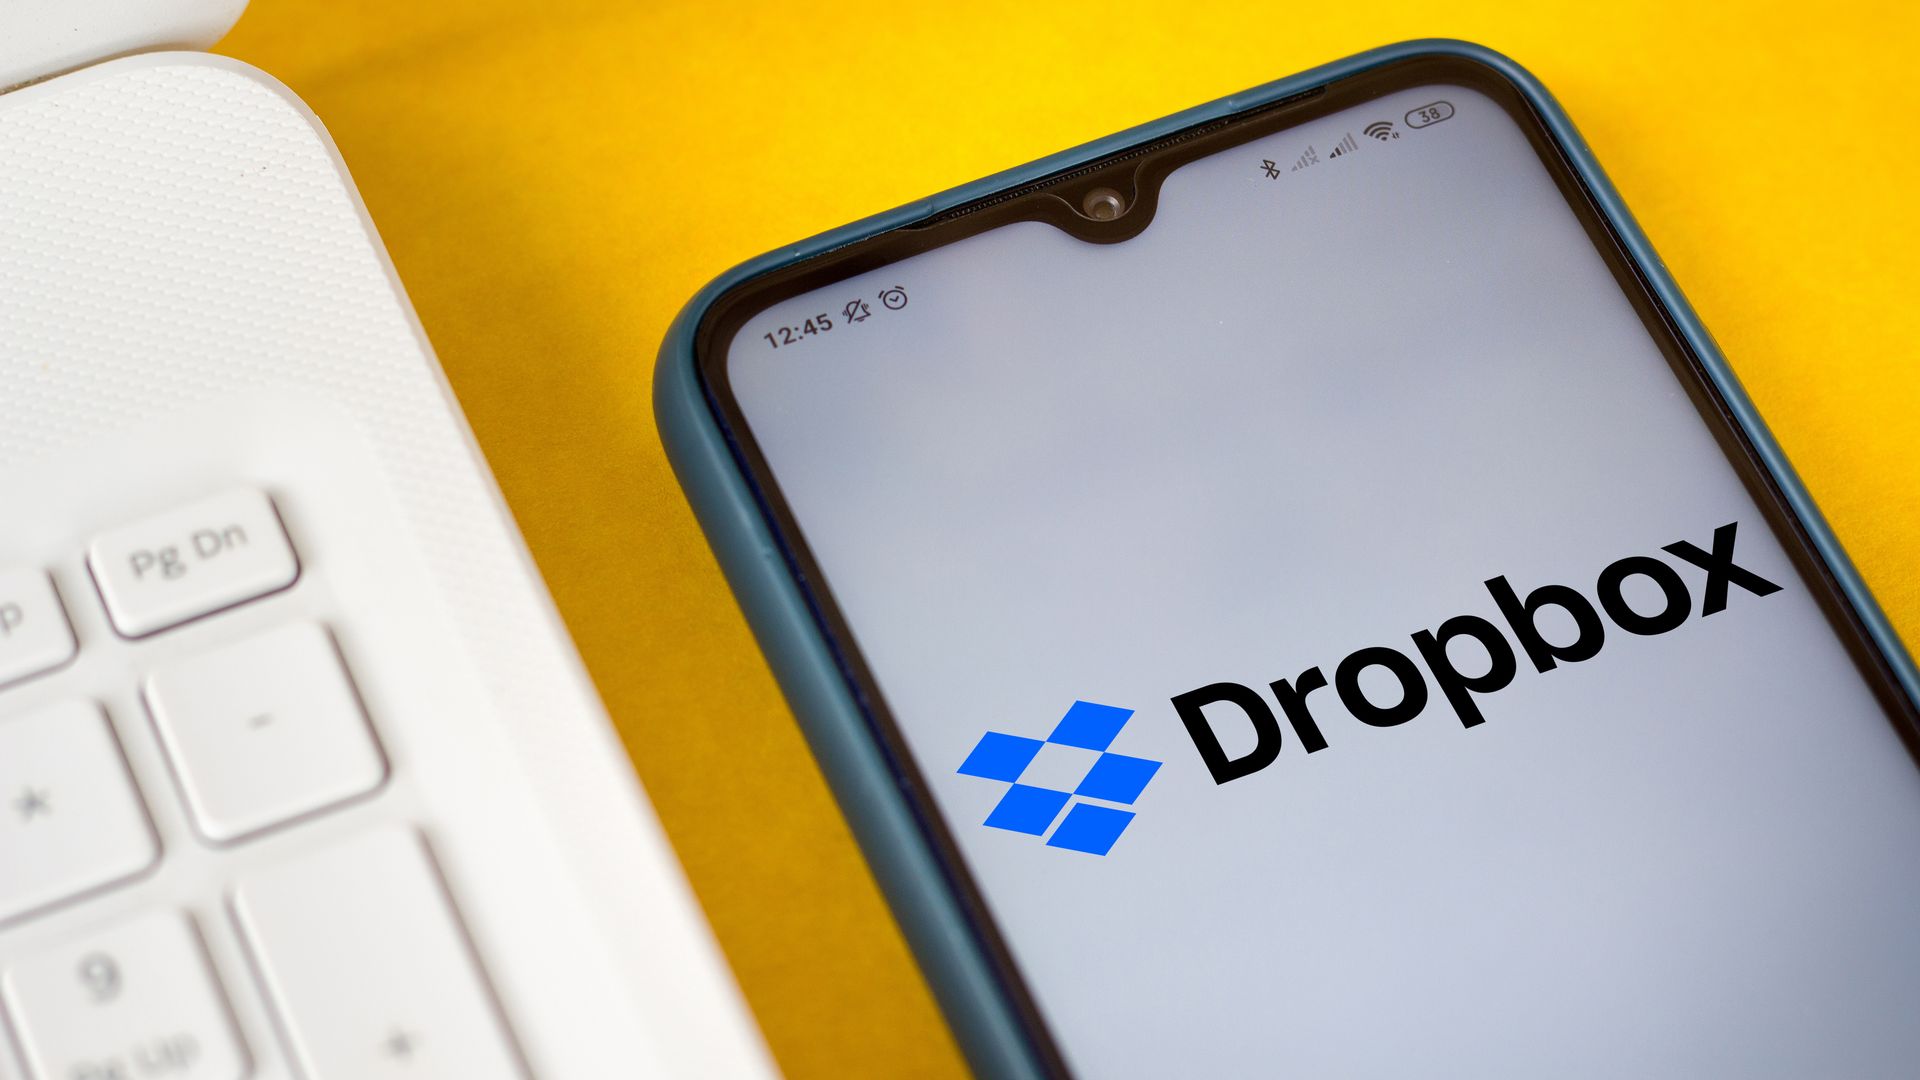 A photo of a smartphone displaying the Dropbox logo